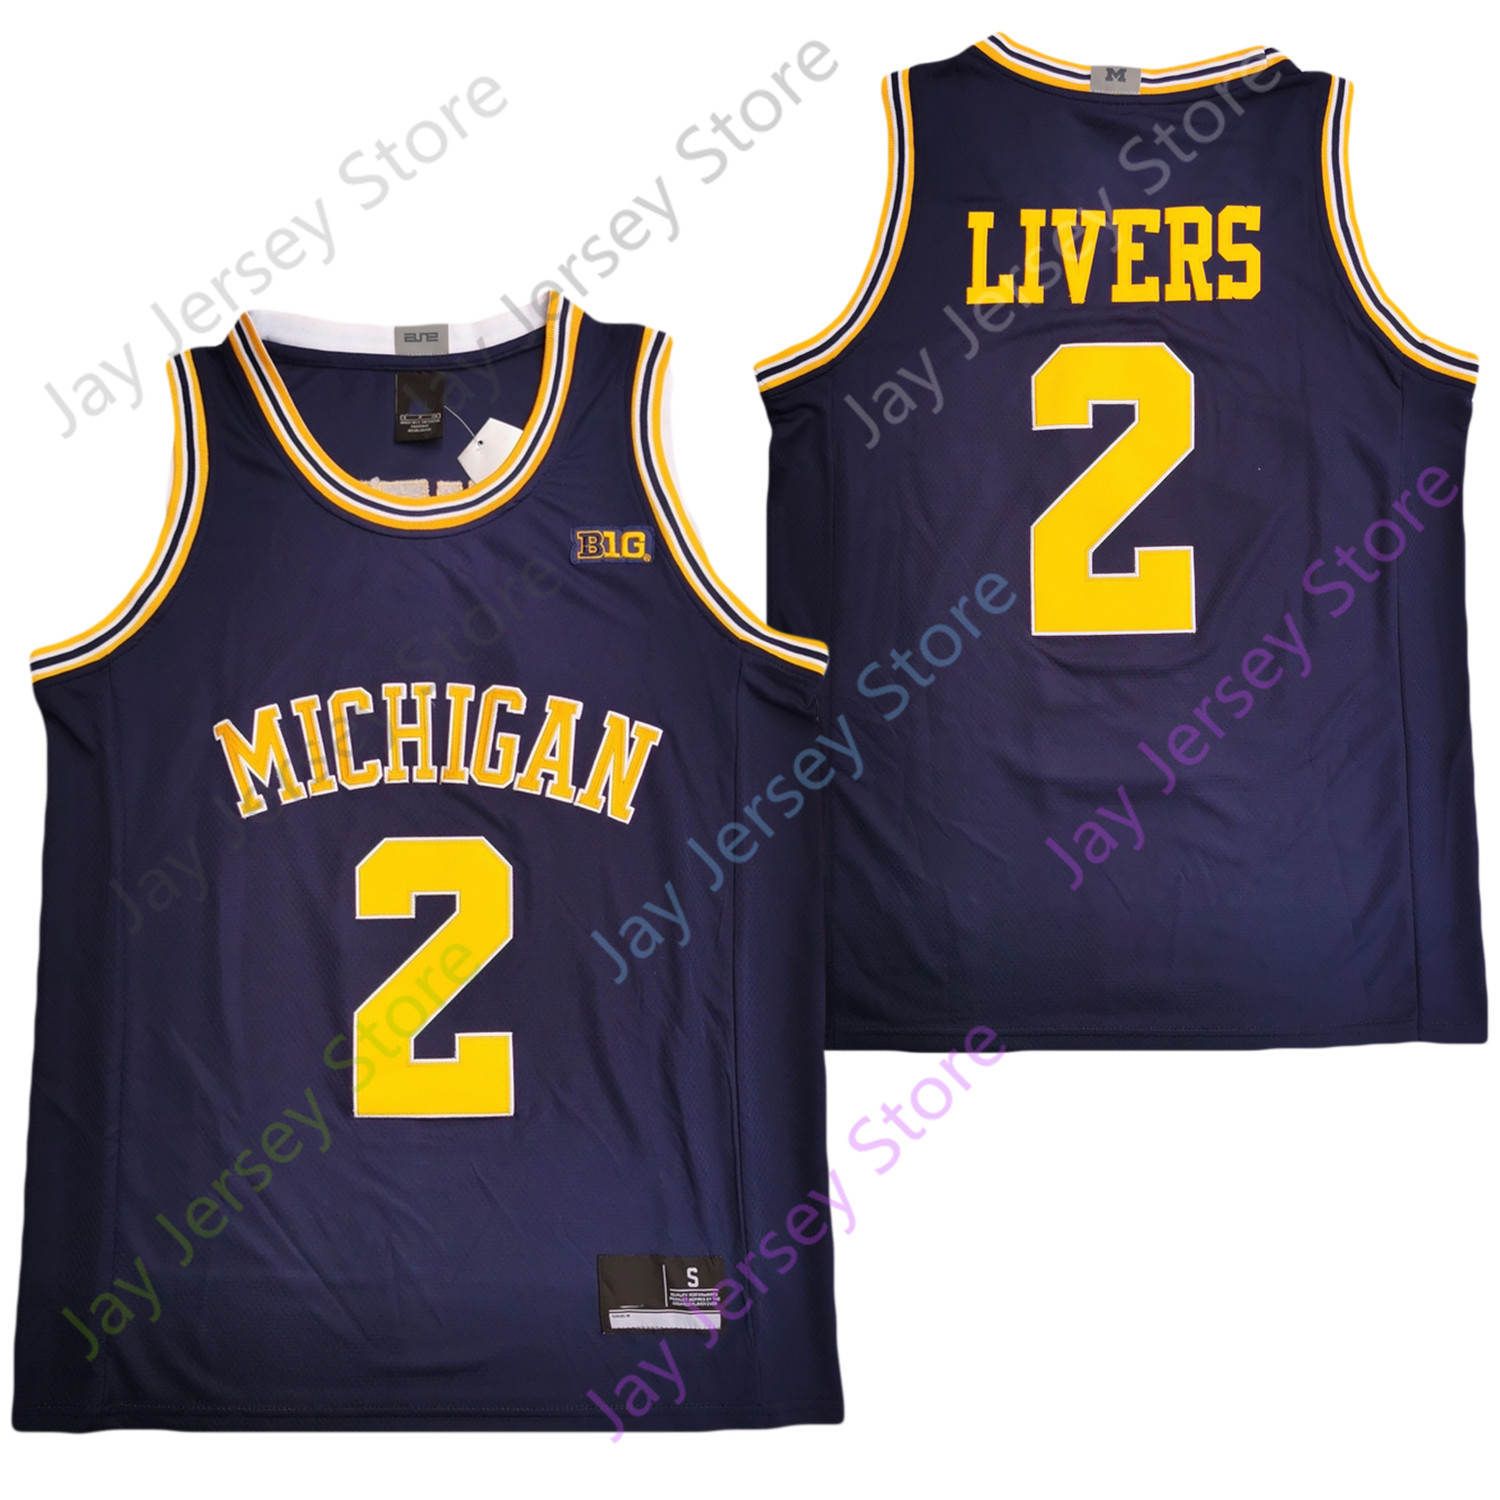 isaiah livers jersey